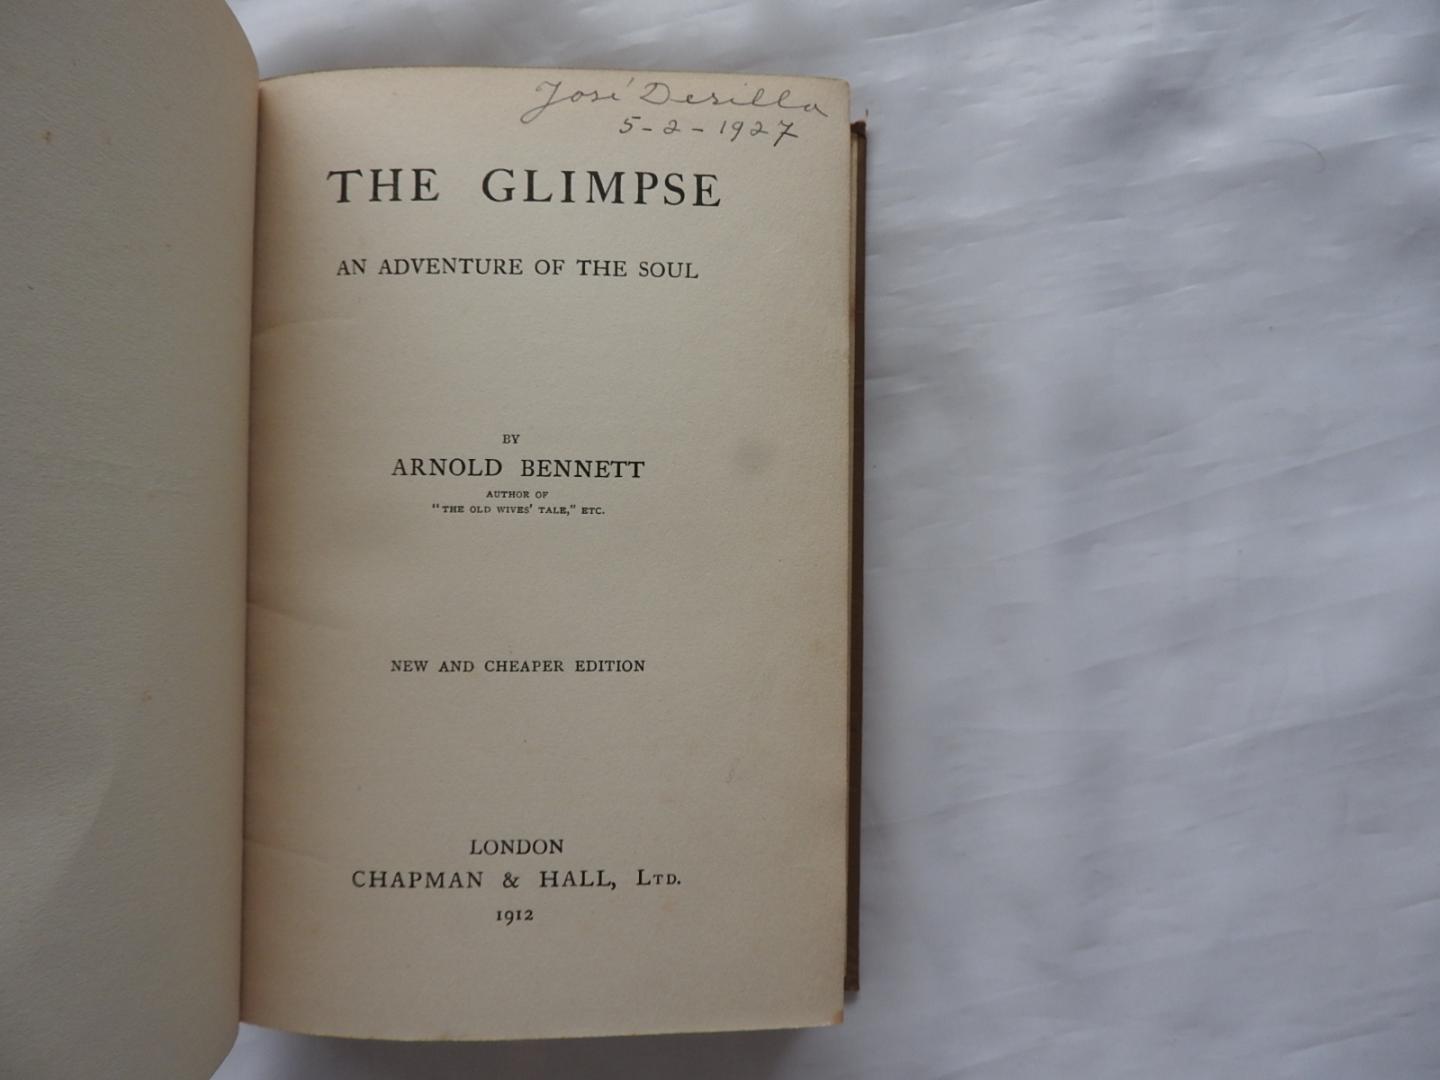 Arnold Bennett A. - The Glimpse - an adventure of the soul